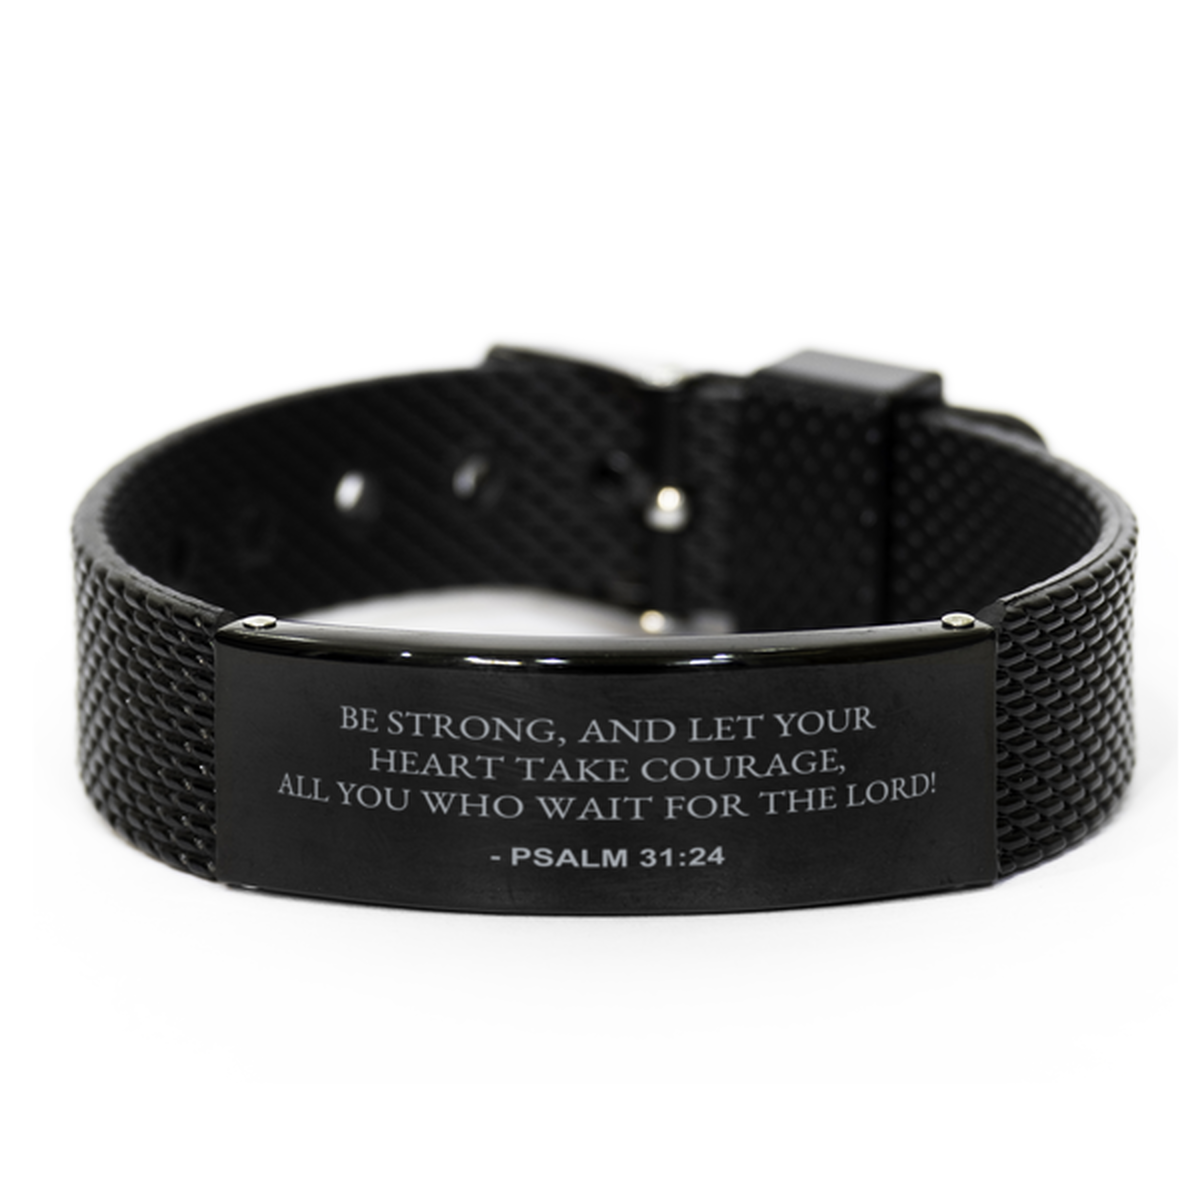 Christian Black Bracelet,, Psalm 31:24 Be Strong, And Let Your Heart Take Courage, All, Motivational Bible Verse Gifts For Men Women